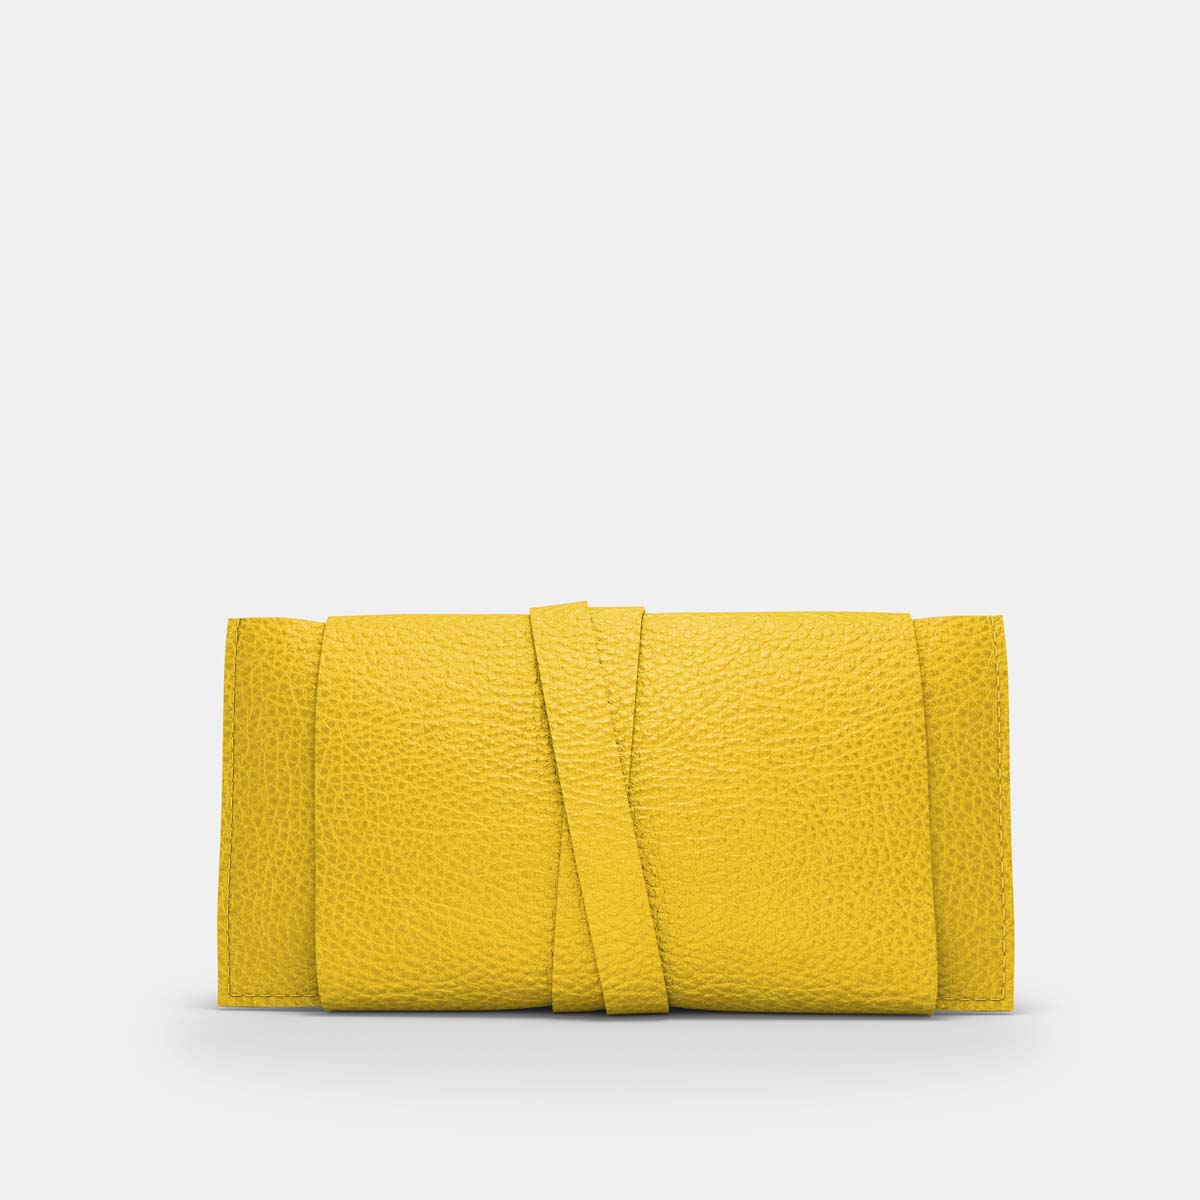 Cable Bag - Yellow and Grey